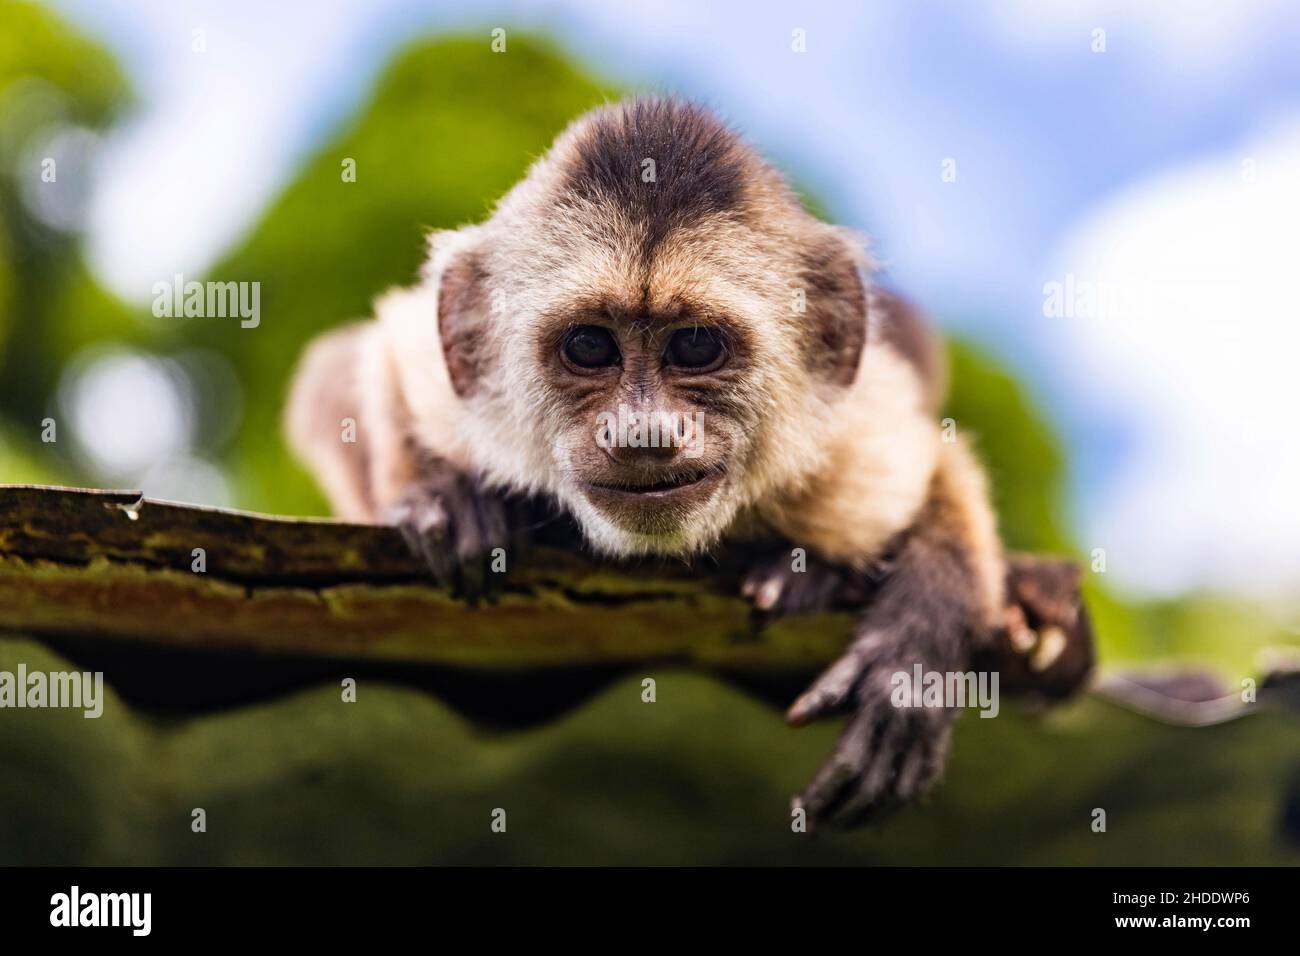 Cute portrait of curious capuchin wild monkey looking at the camera close up Stock Photo